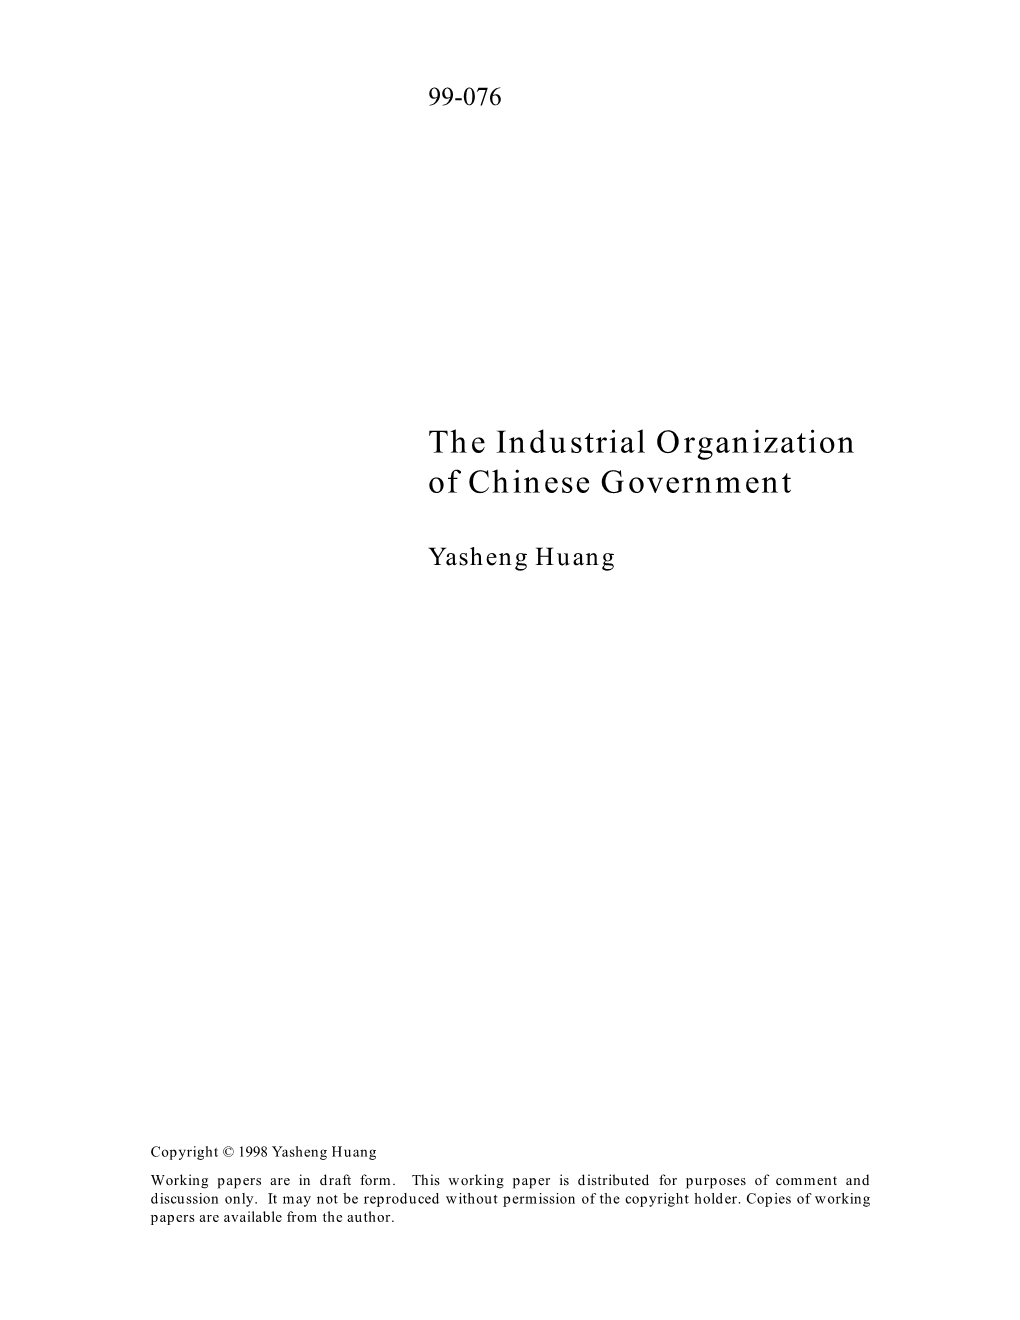 The Industrial Organization of Chinese Government